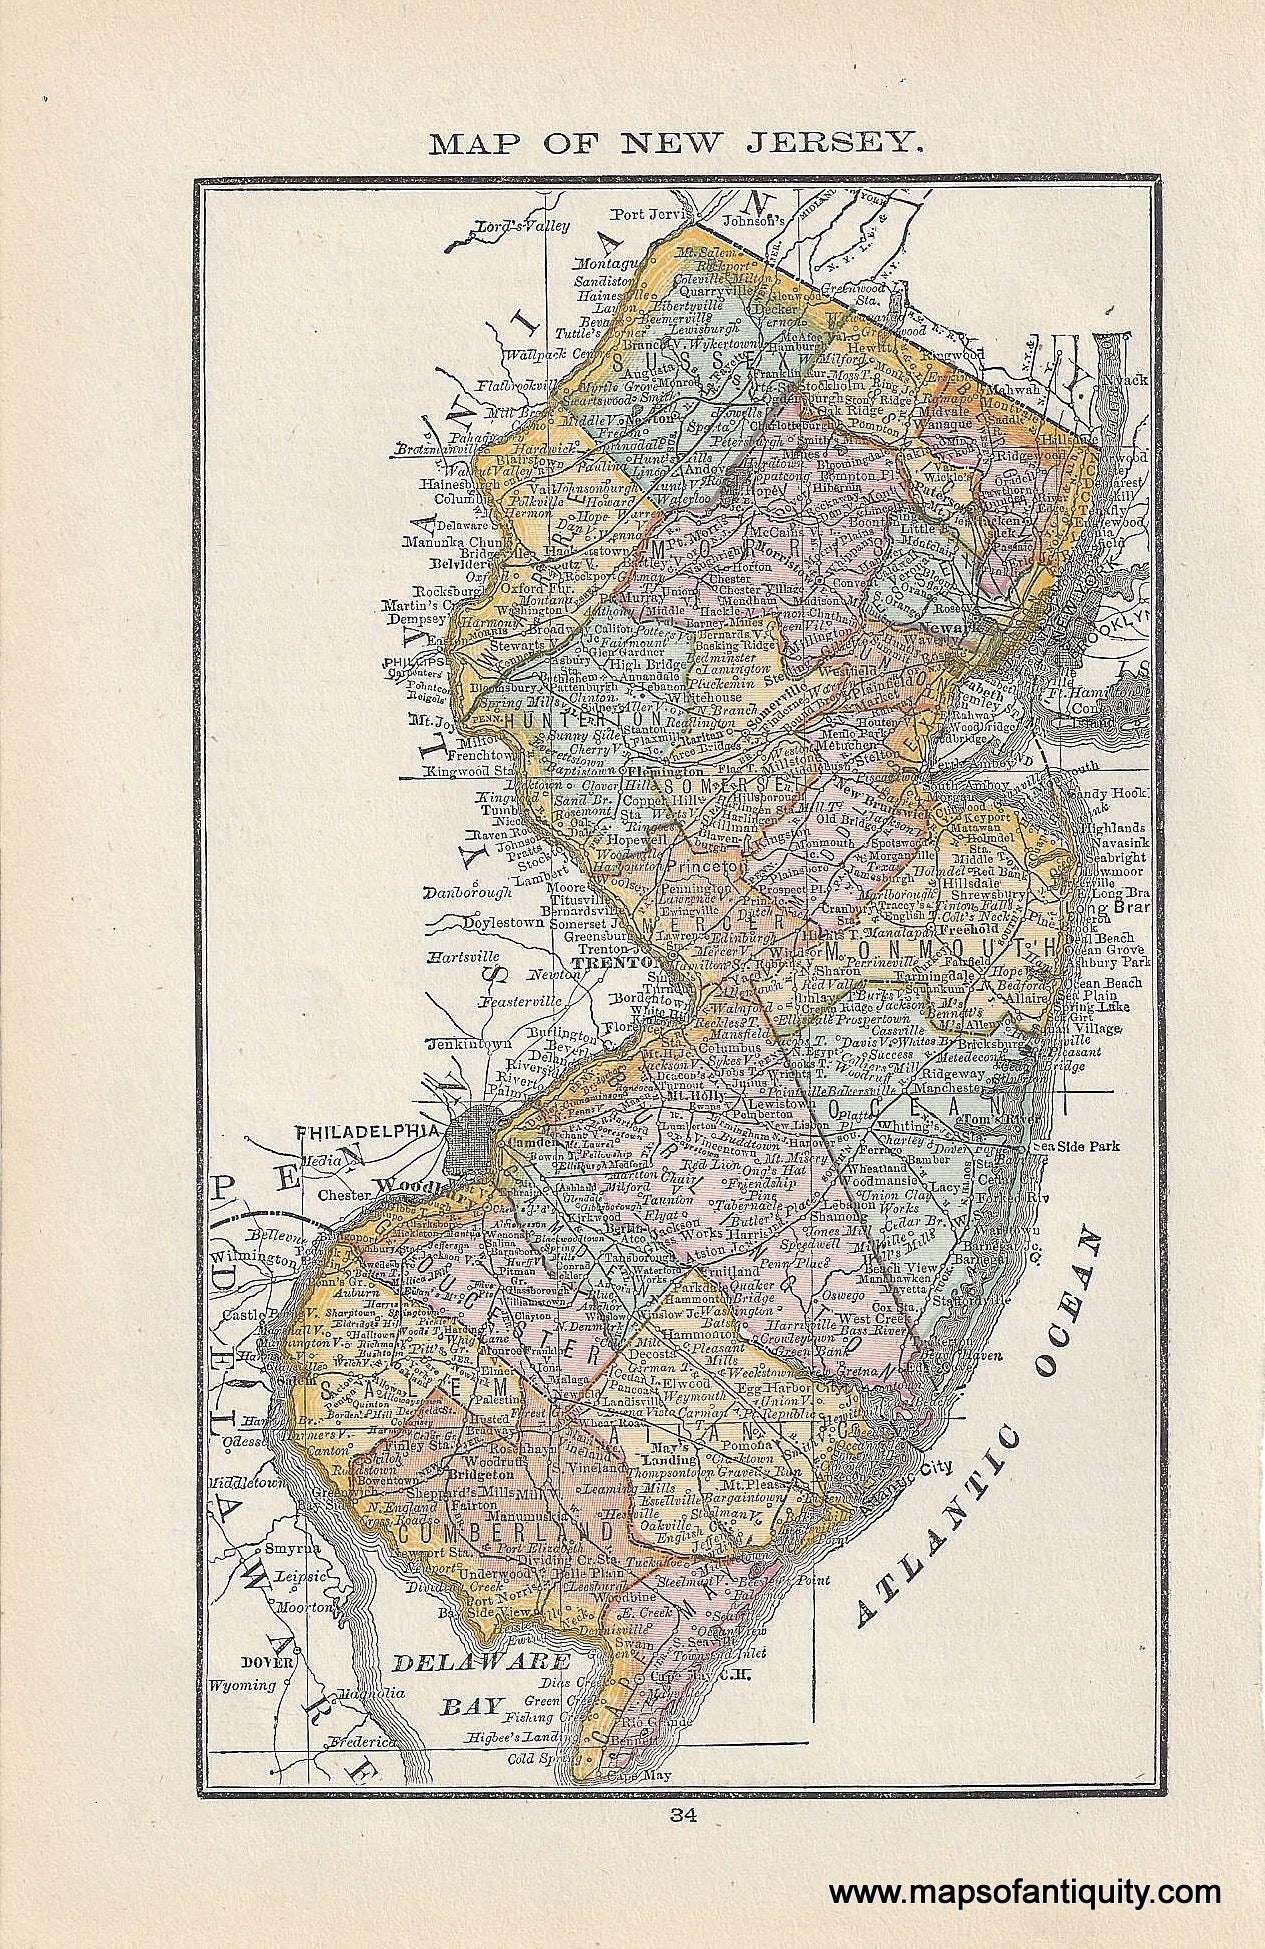 Genuine Antique Map-Map of New Jersey-1884-Rand McNally & Co-Maps-Of-Antiquity